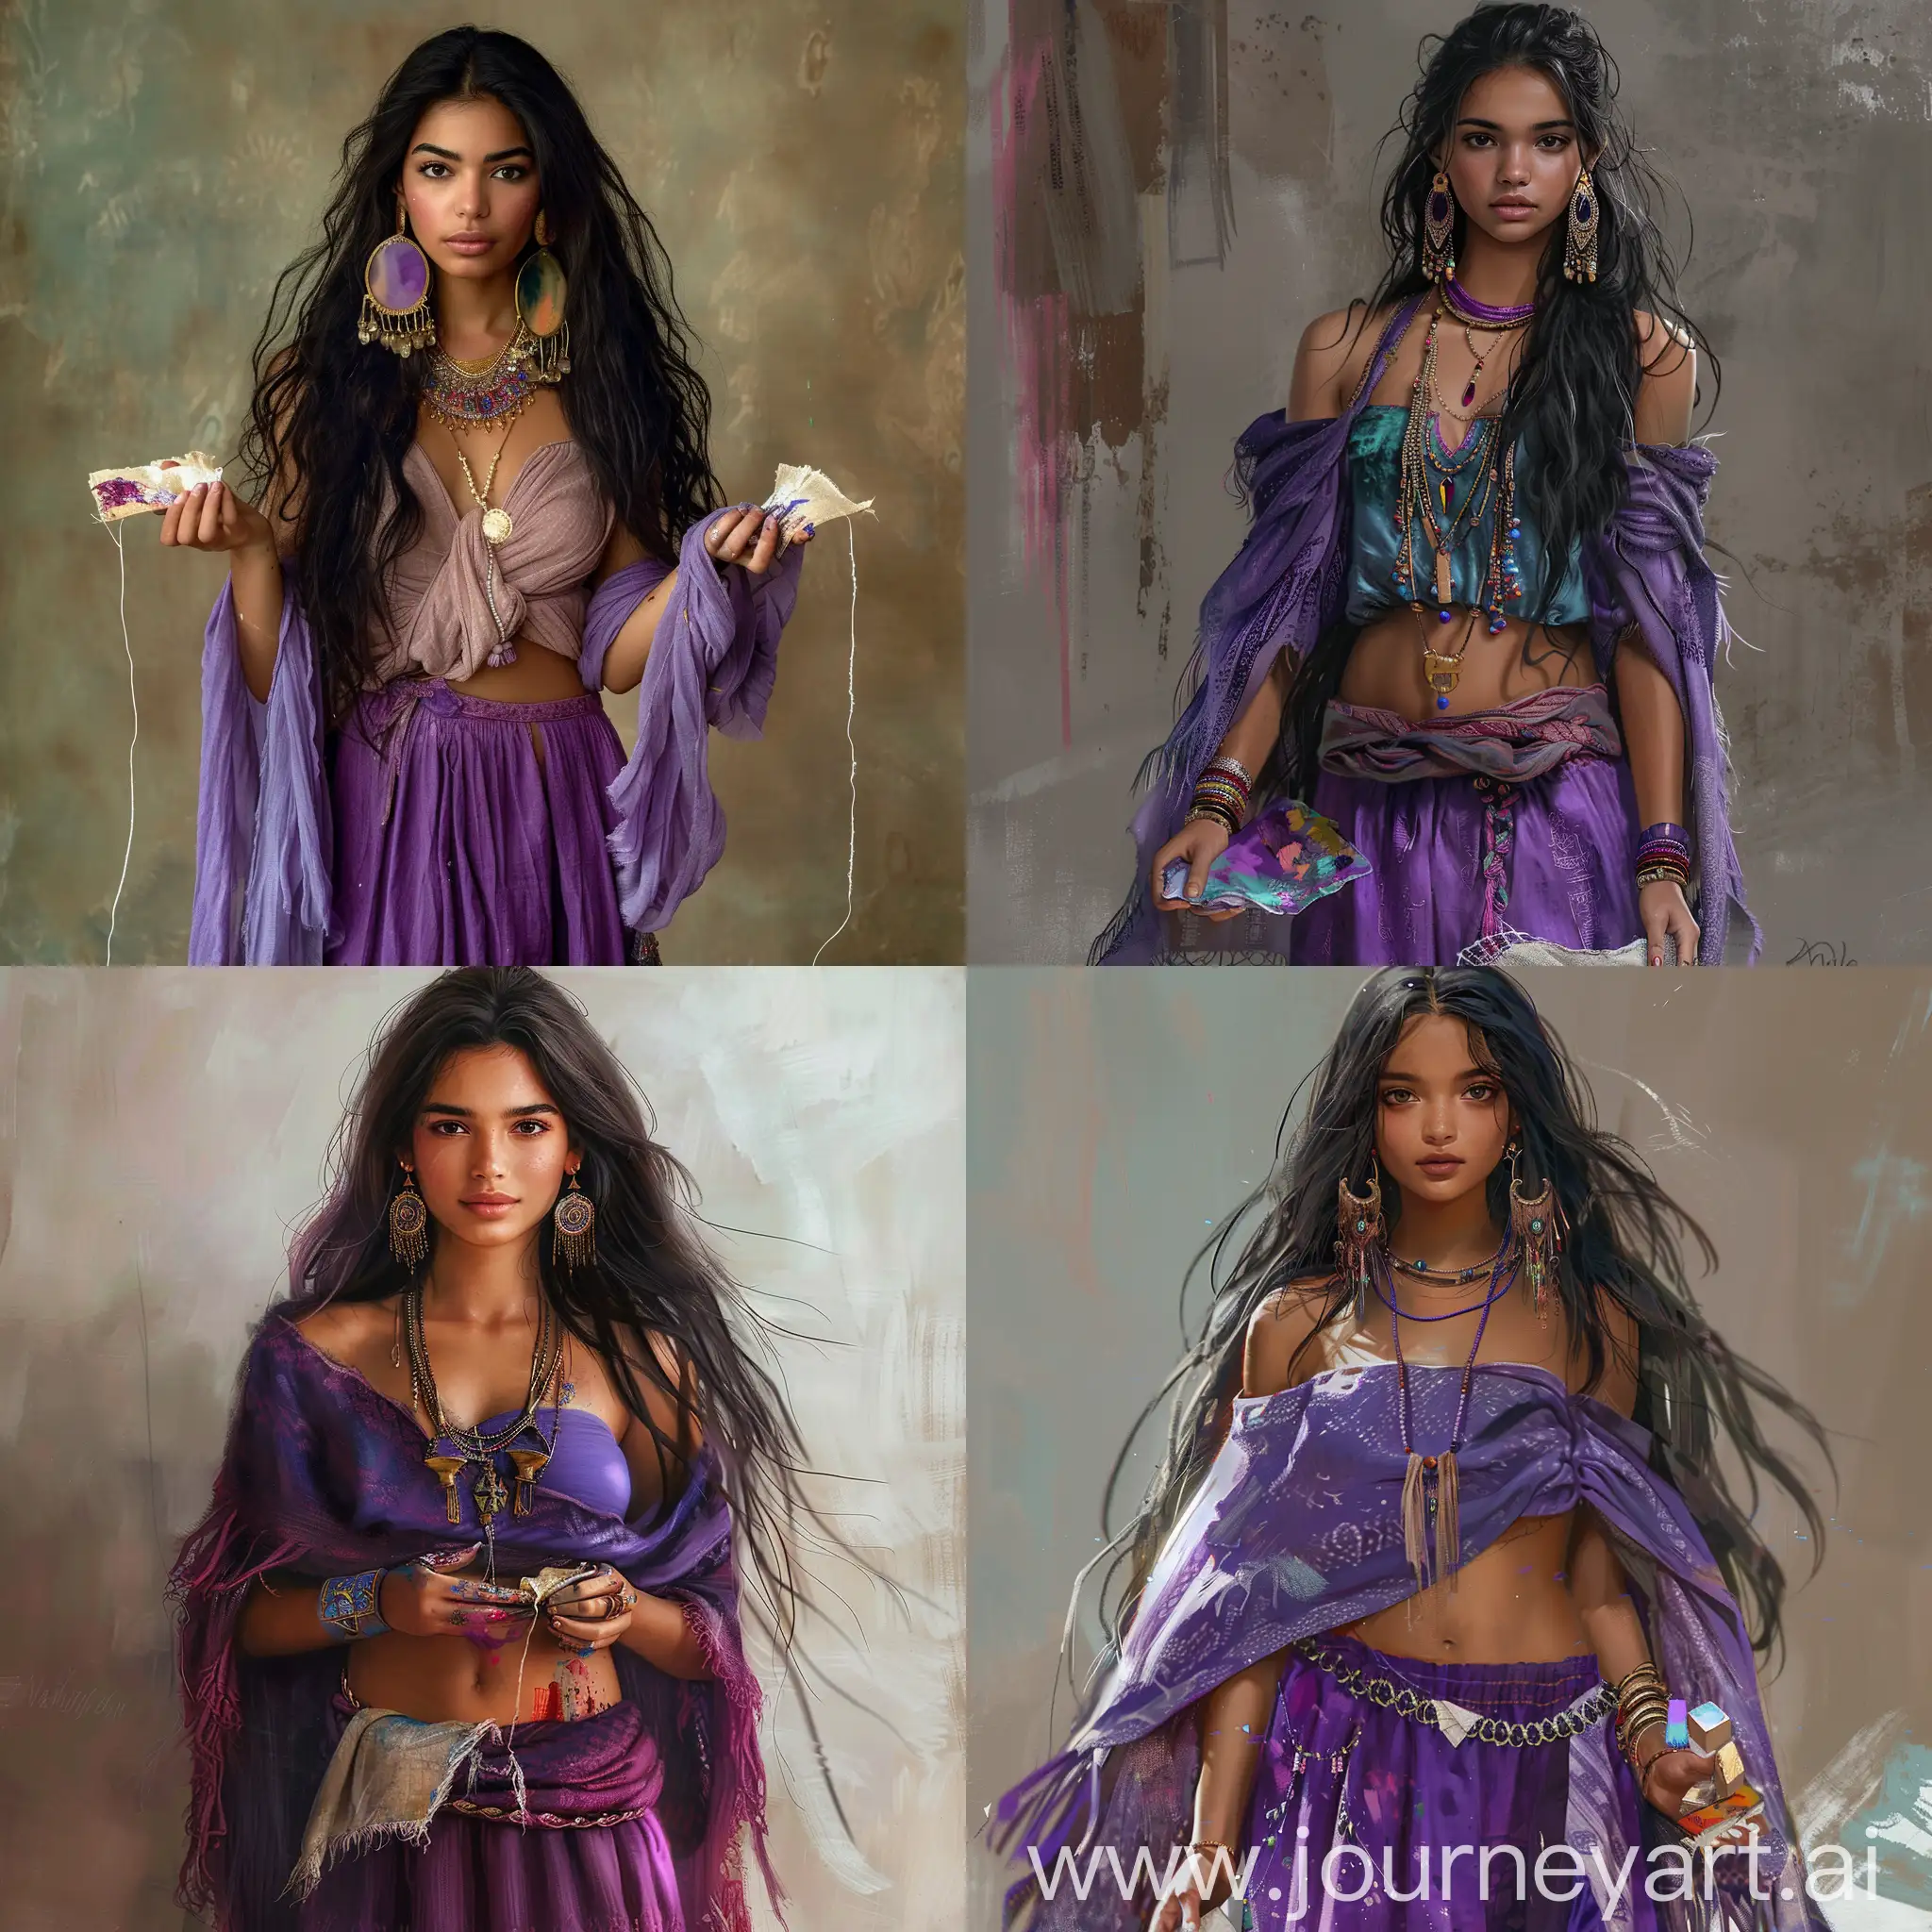 19 years old tall Arab girl named Mahri, long hair, big earrings, thin necklace, purple skirt and purple short crop, purple shawl, paint and linen pieces in her hands, hair as black as night and brown skin.